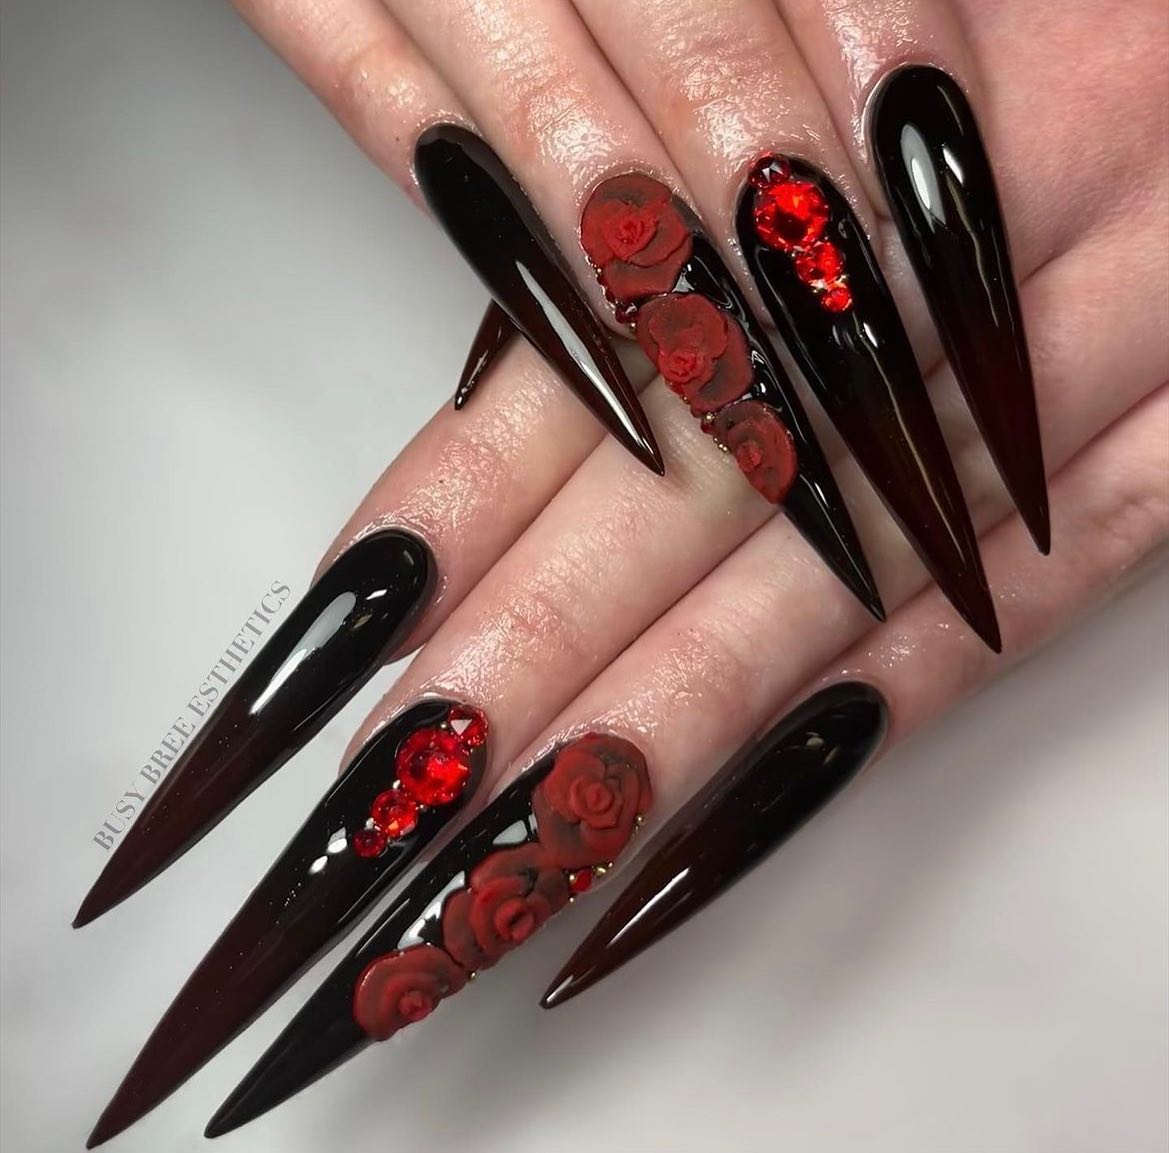 Red and black goth nails